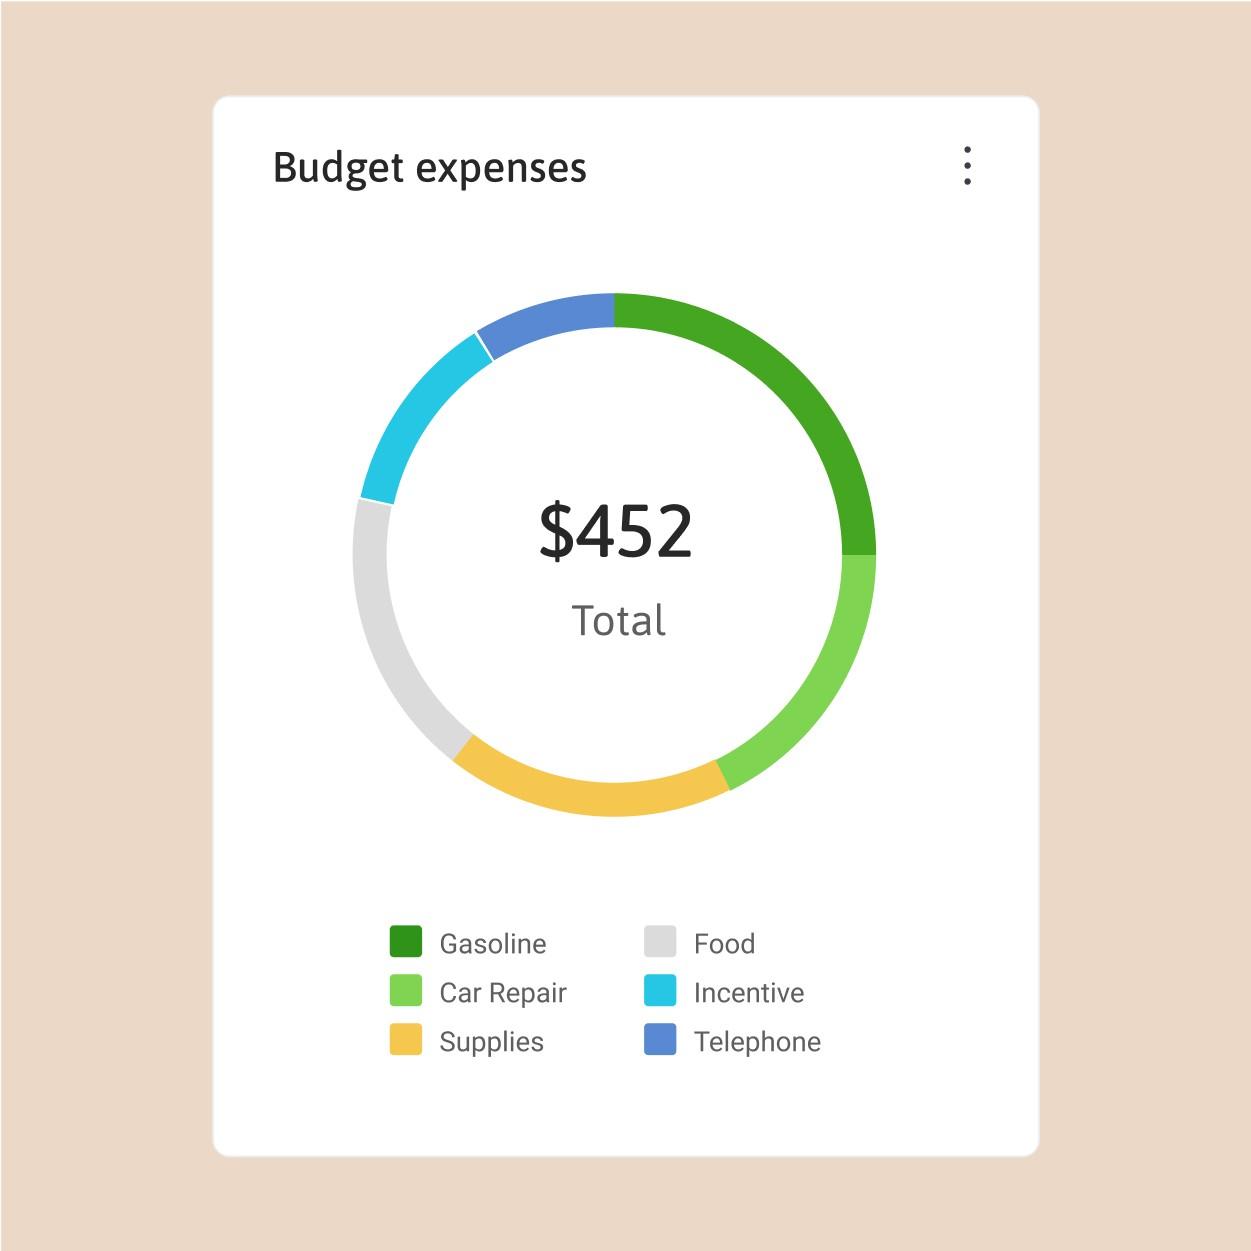 Budget expenses chart on SUMMA mobile application 